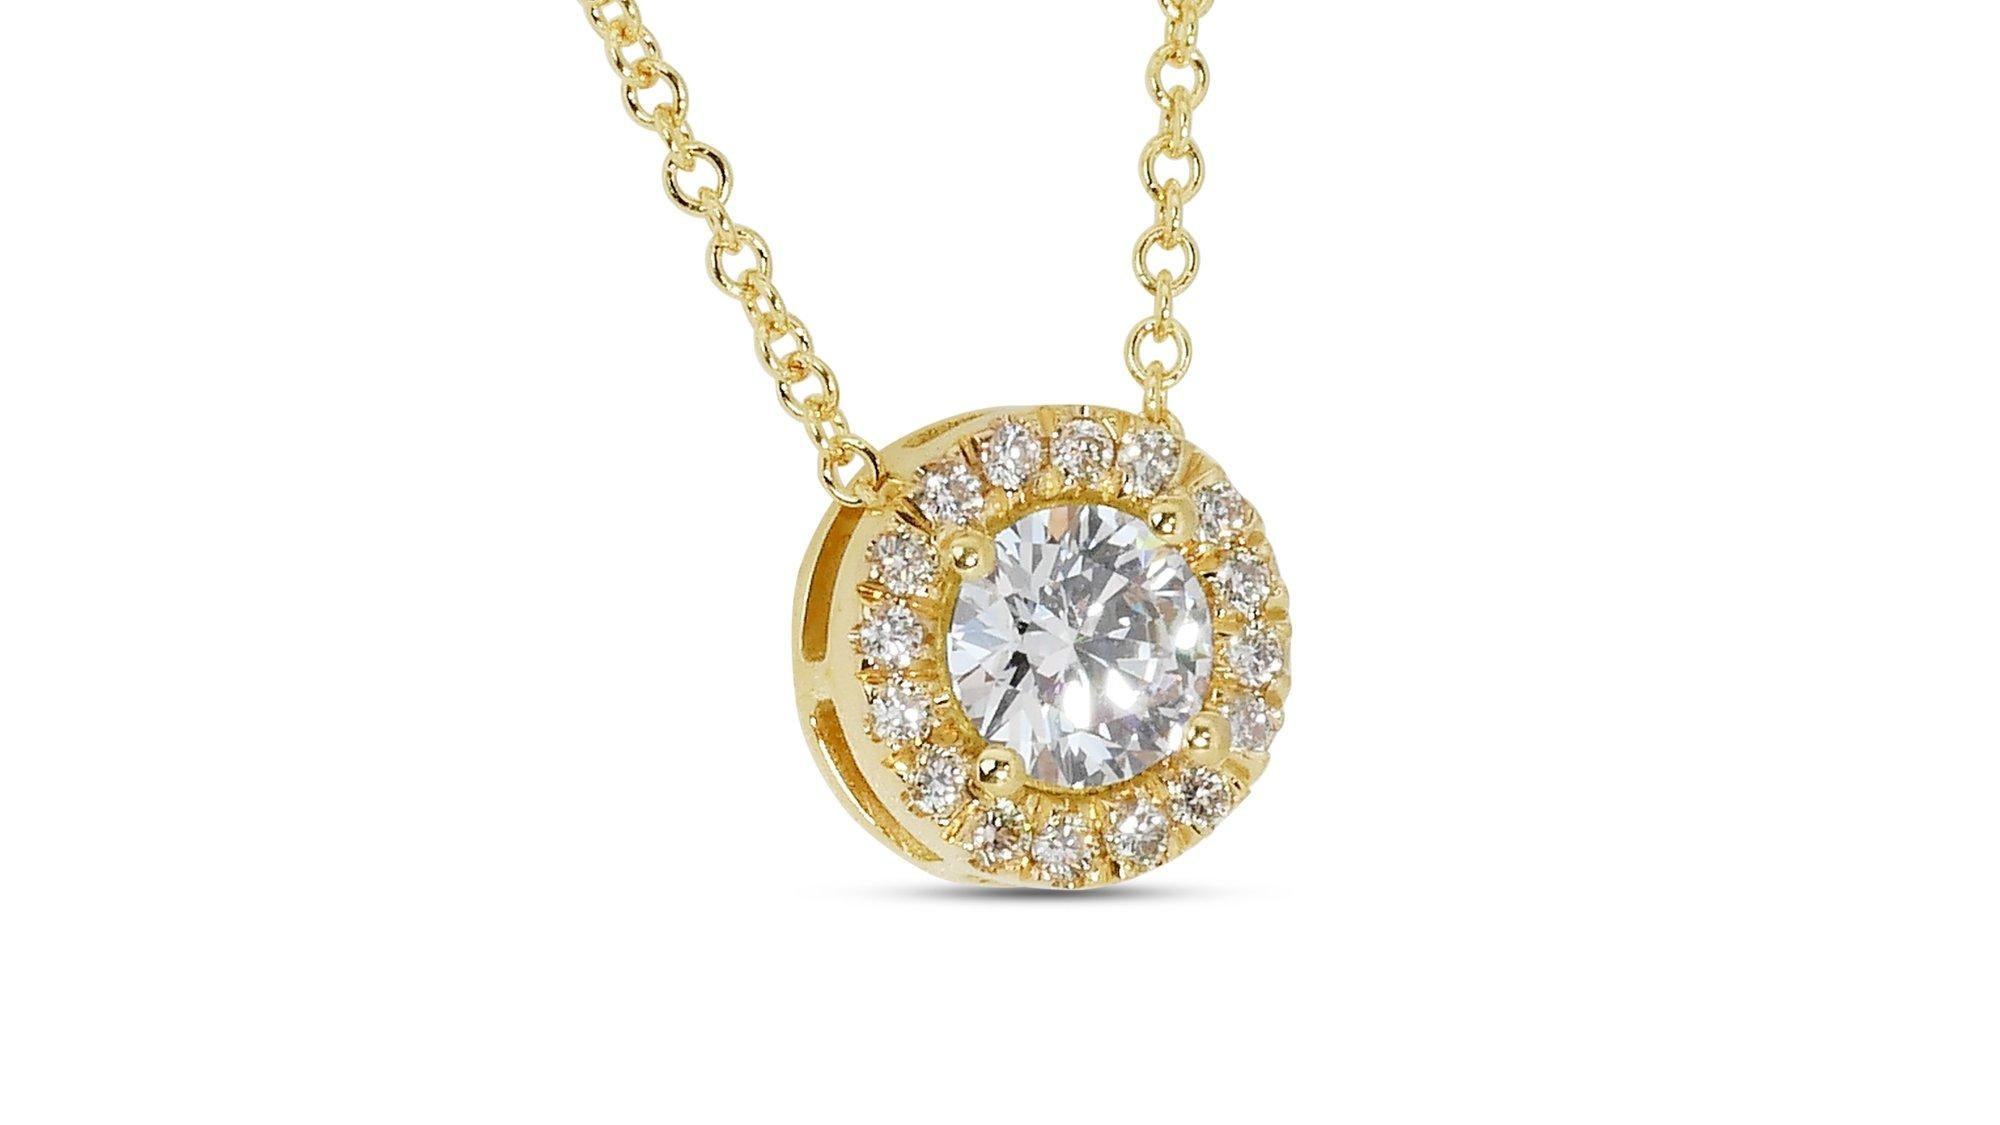 Exquisite 18k Yellow Gold Natural Diamond Halo Necklace w/0.85 ct - GIA Certfied

This exquisite 18k yellow gold halo diamond necklace showcases a timeless design, featuring a dazzling diamond center stone with 0.70 carat, and 16 sparkling side